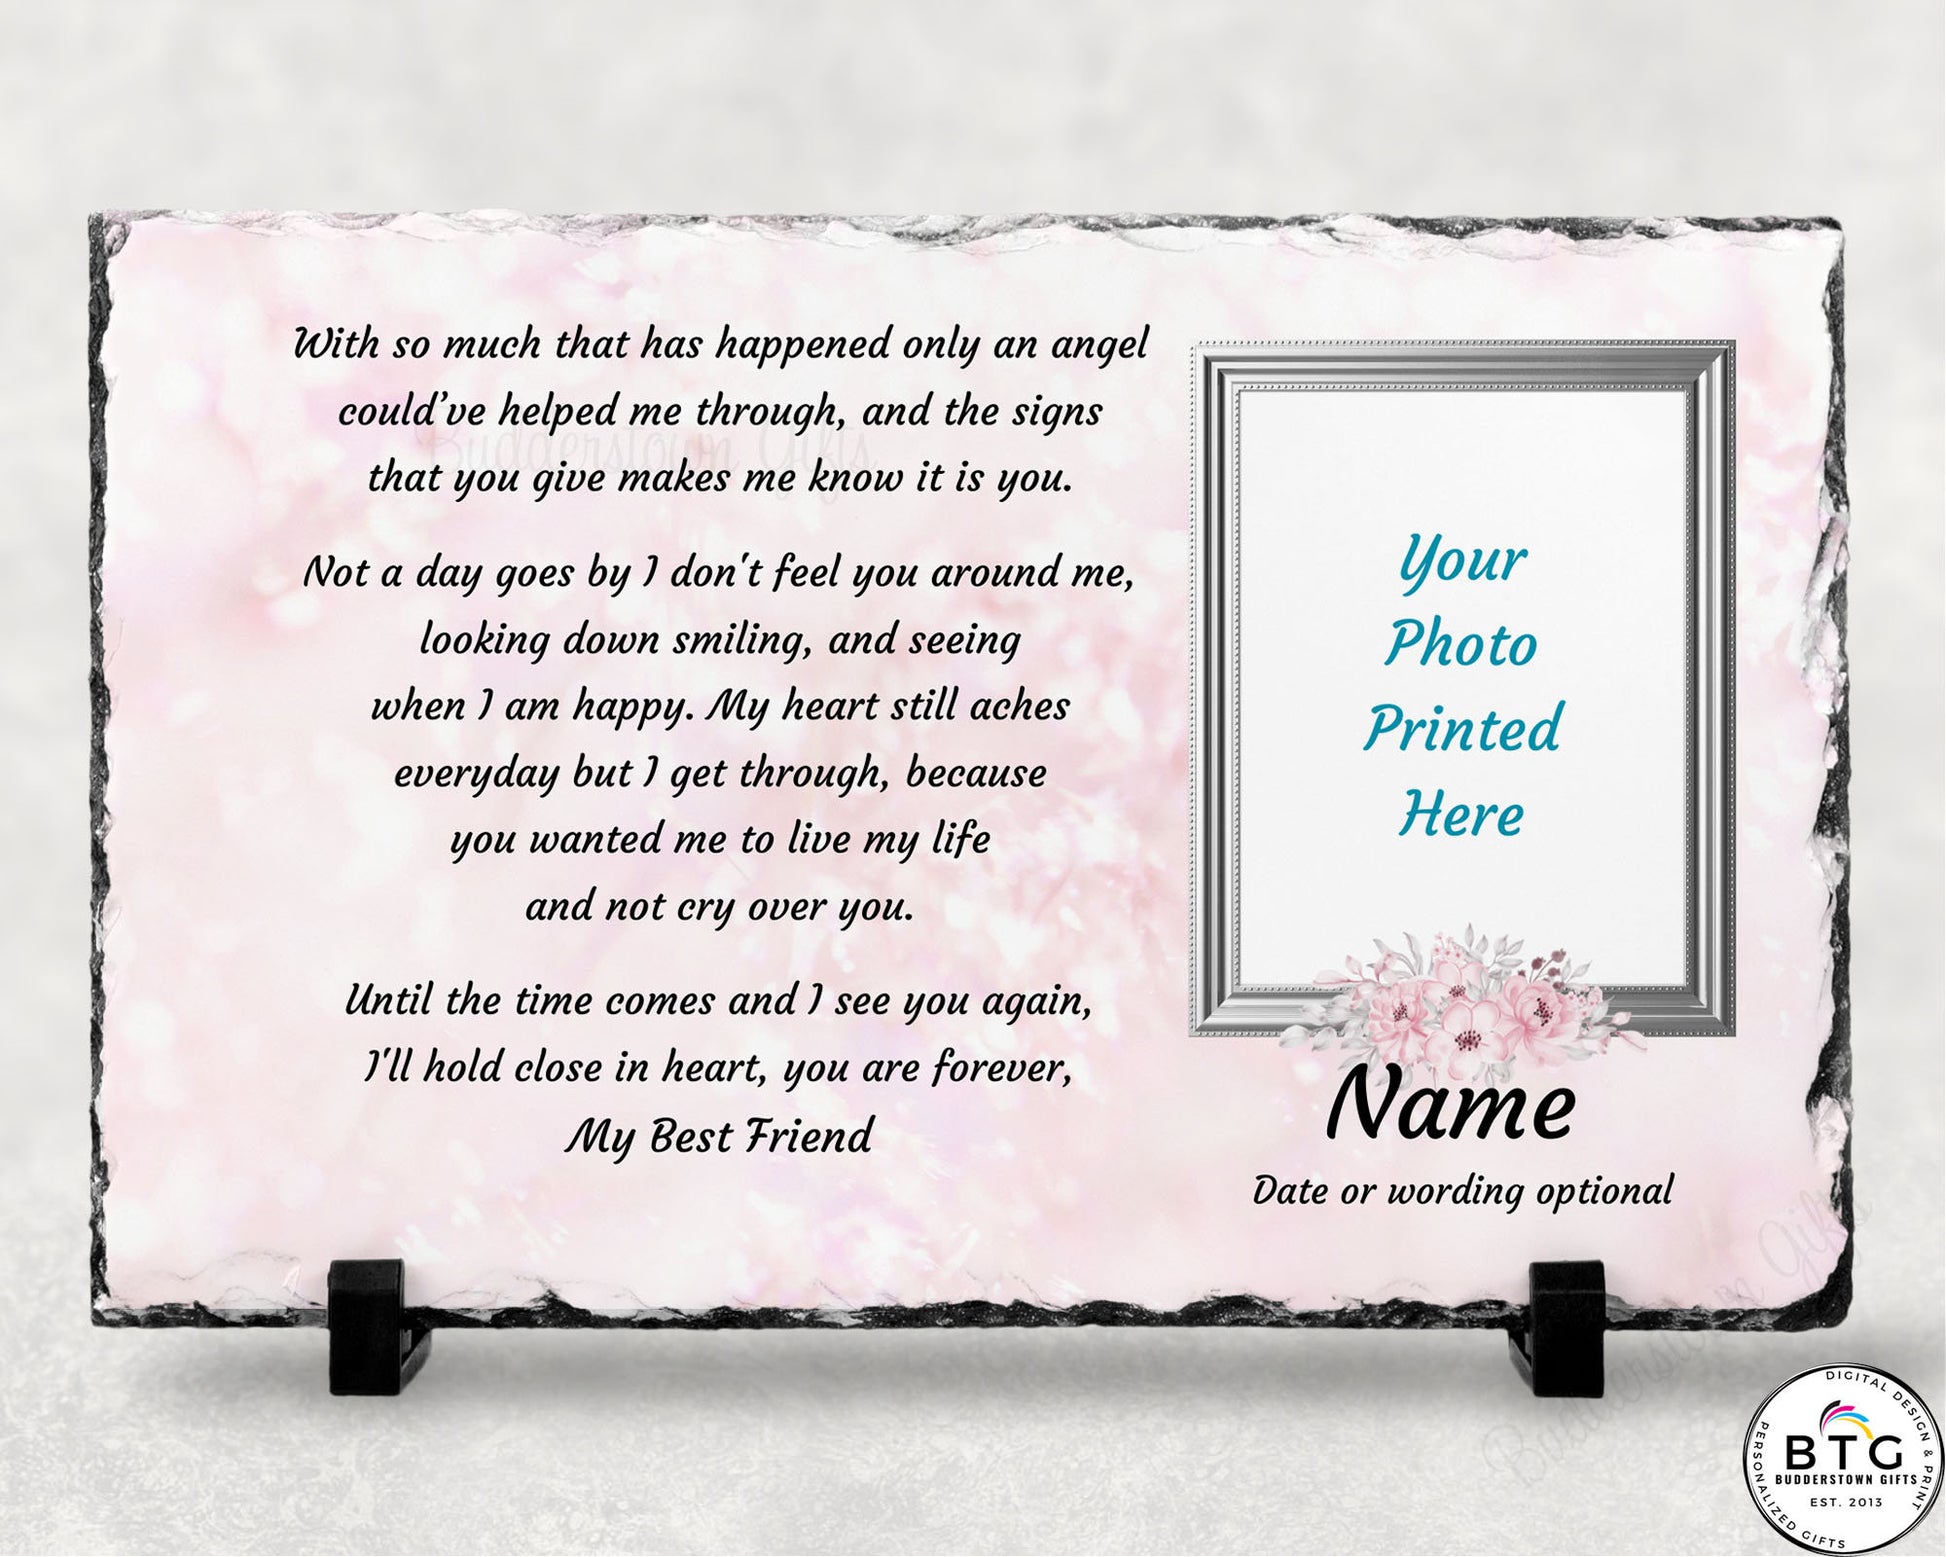 Capture cherished memories with our Photo Slate, printed with a beautiful poem. This Memorial Slate serves as a thoughtful gesture for your grieving loved one, expressing your heartfelt care during this difficult time or use it to honor and display the cherished memories of your late loved one. Measuring 7 1/2" x 11"